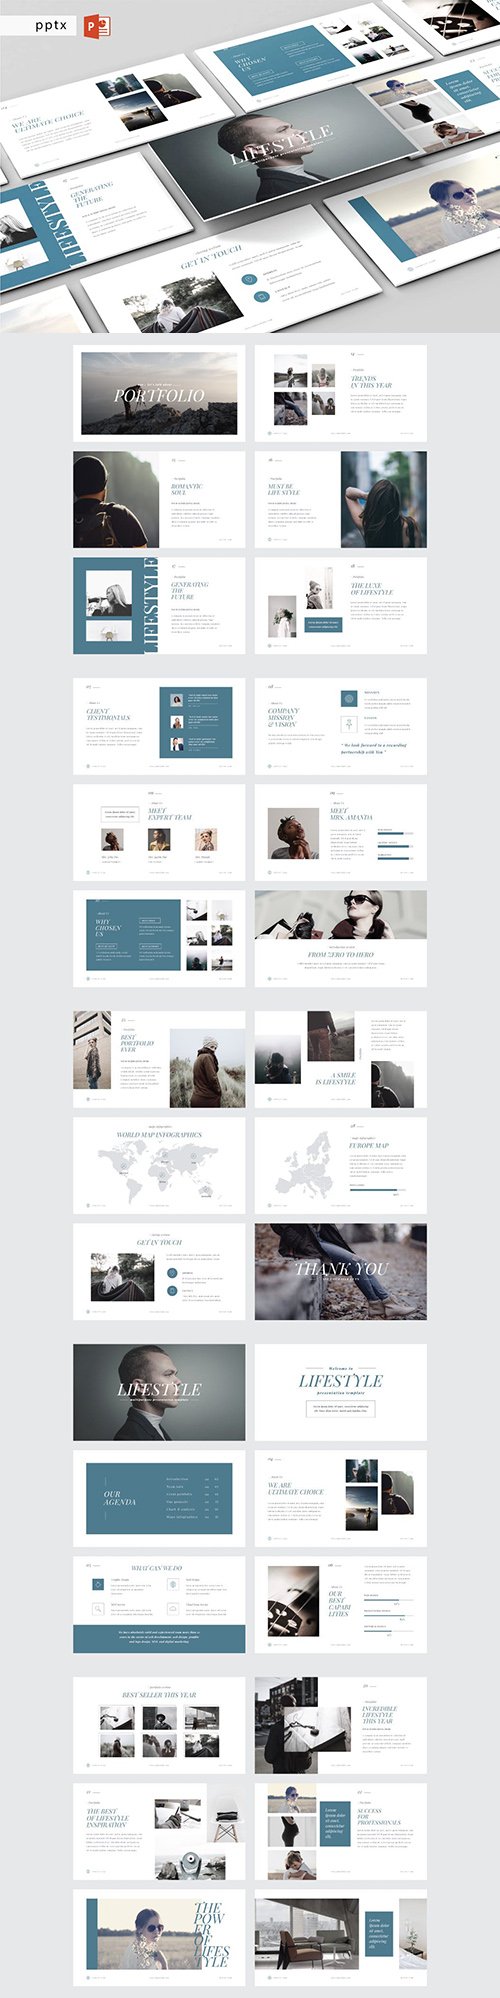 LIFESTYLE - Multipurpose Powerpoint Template V62